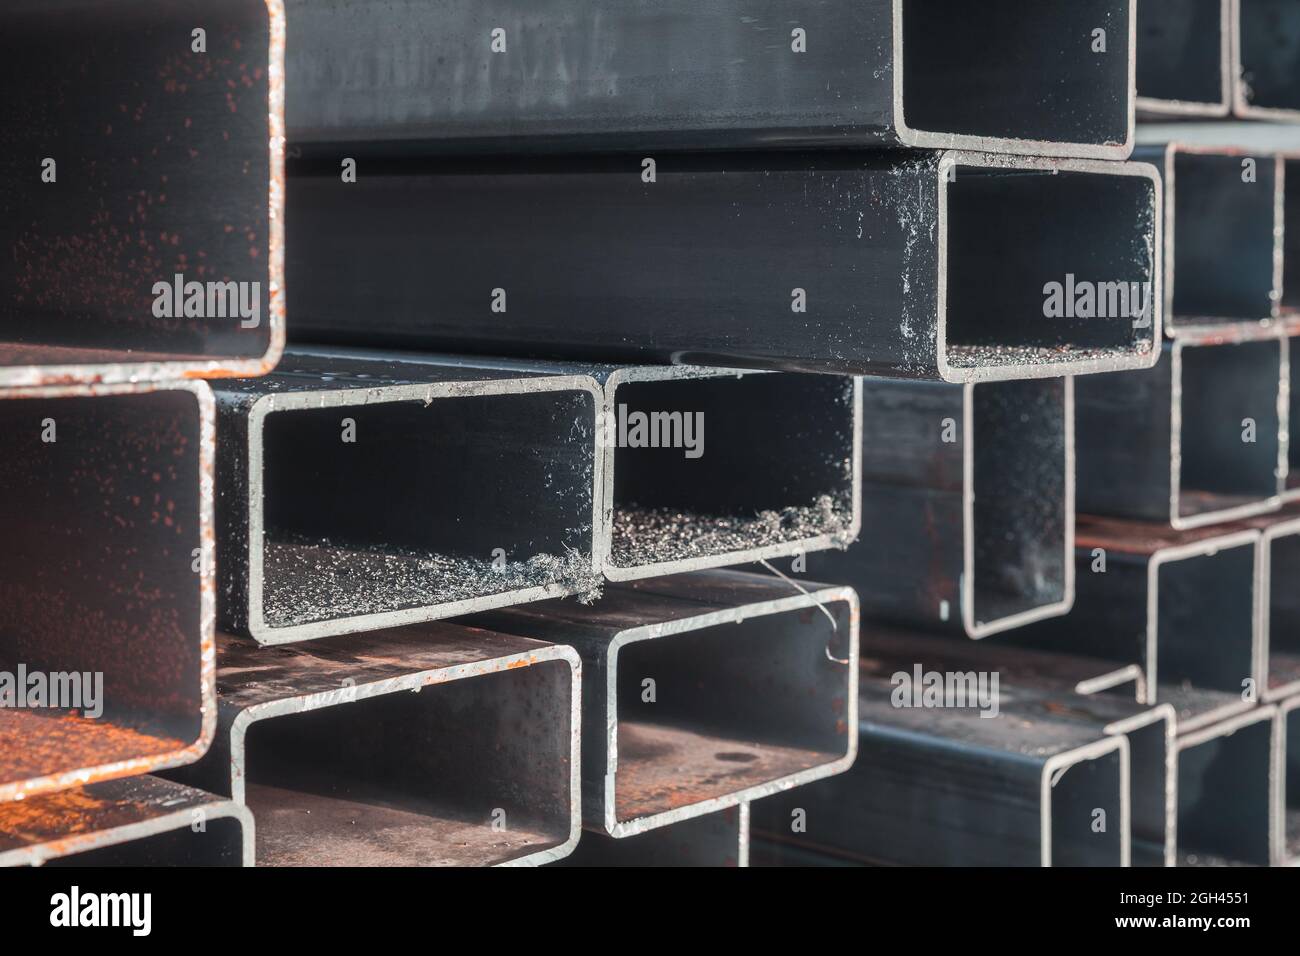 Abstract heavy industry background. Stack of rolled steel products, metal pipes with rectangular cross-section, close-up photo with selective focus Stock Photo